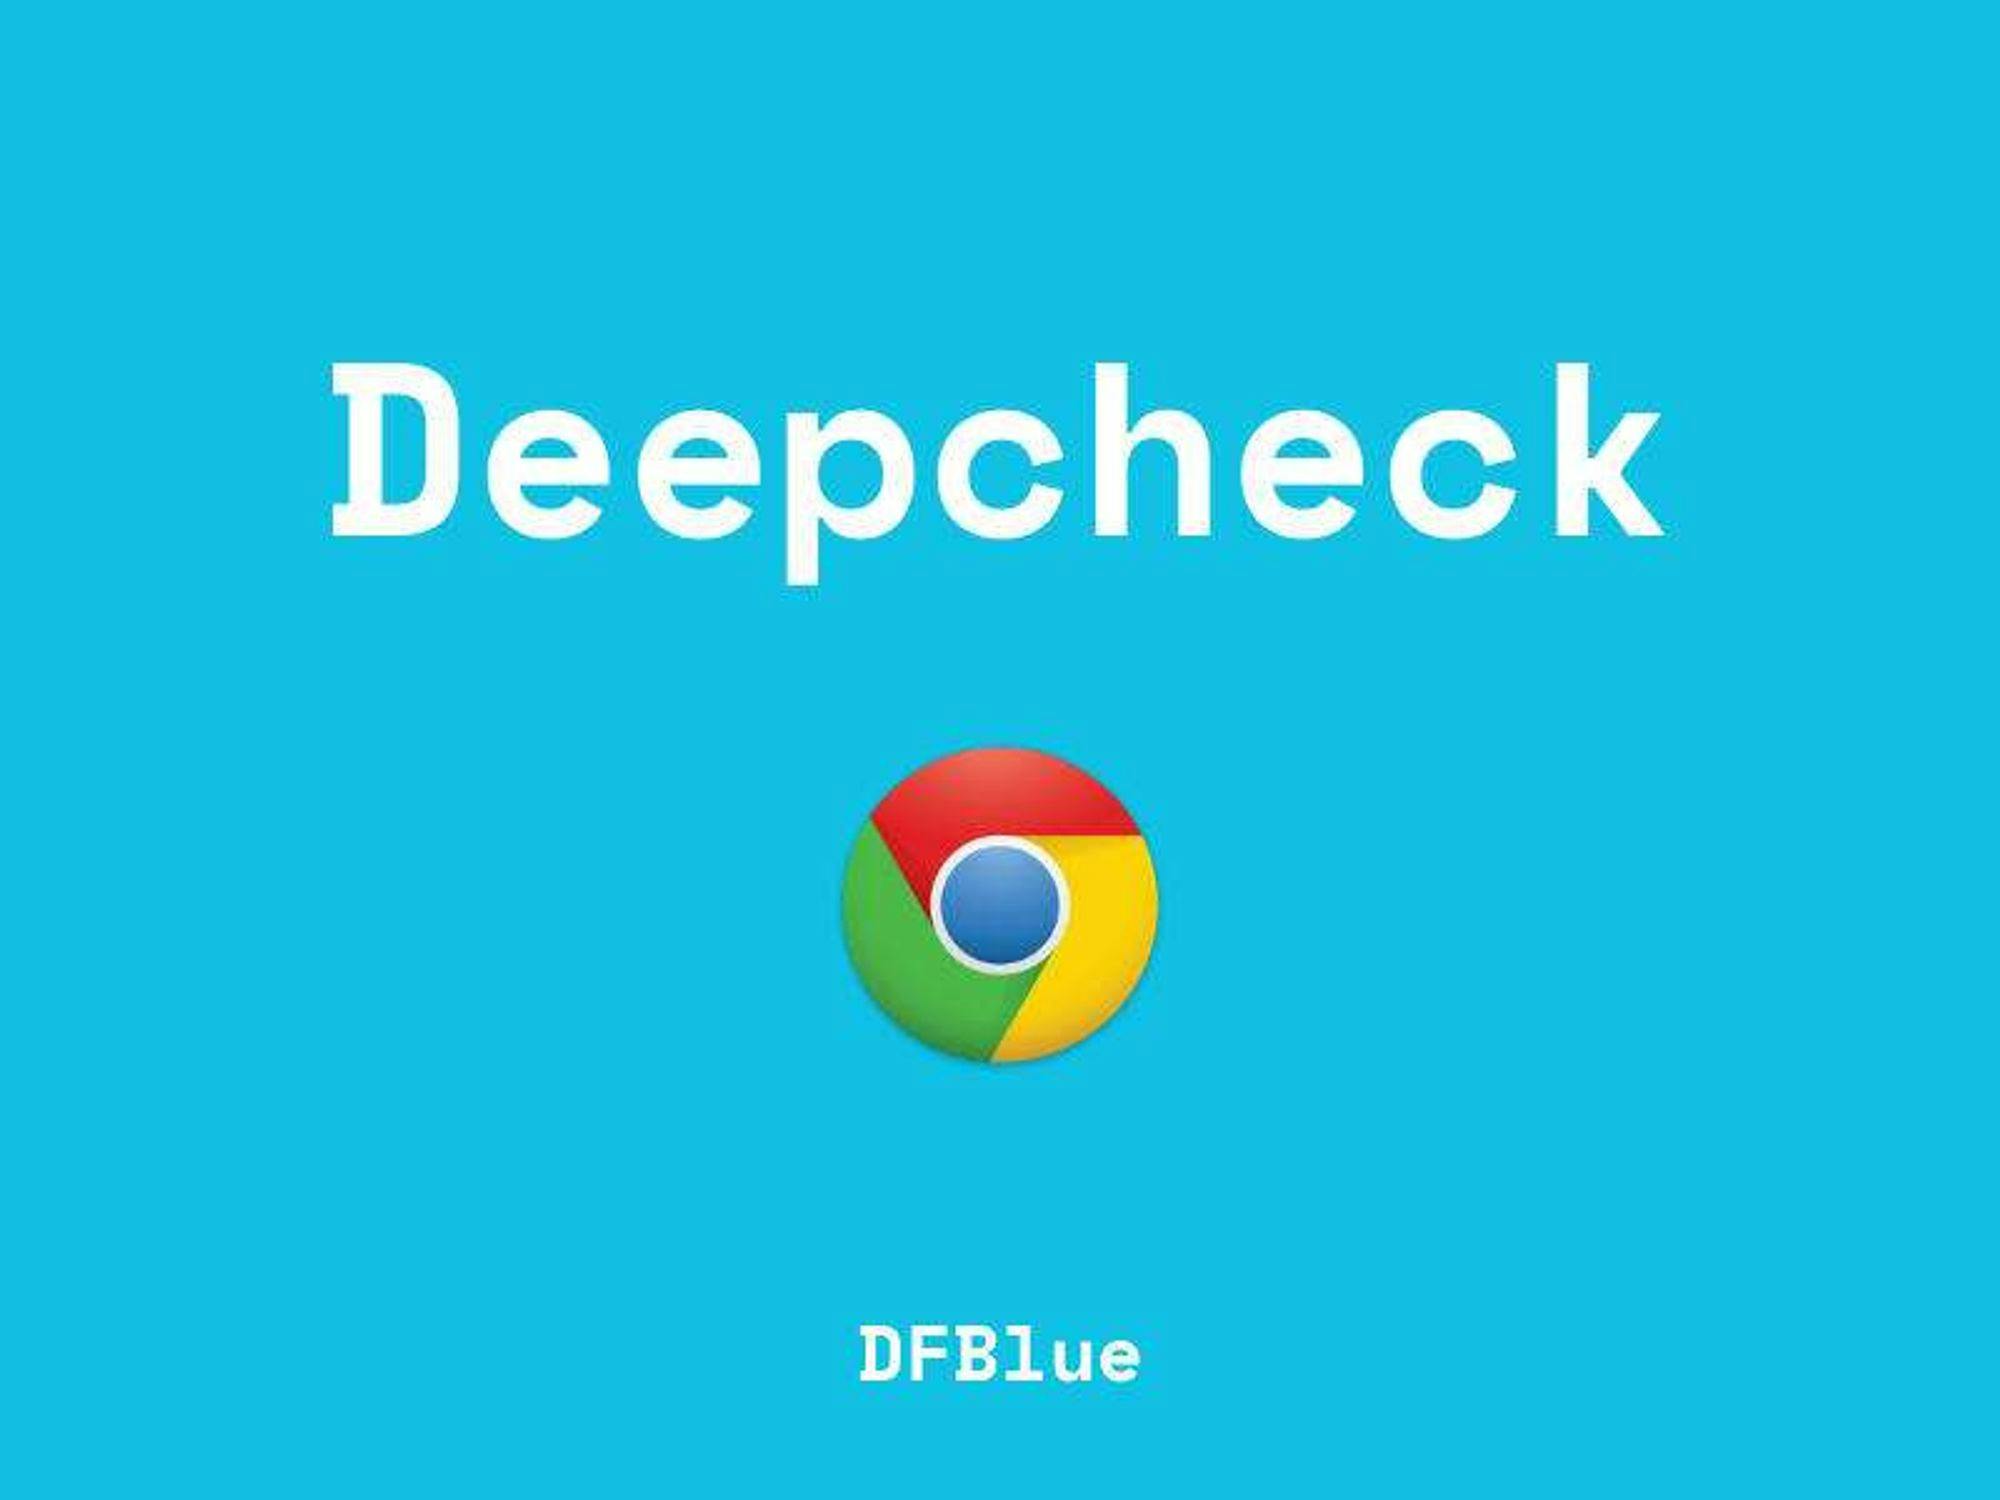 Launched Deepcheck — The internet's missing reputation checker